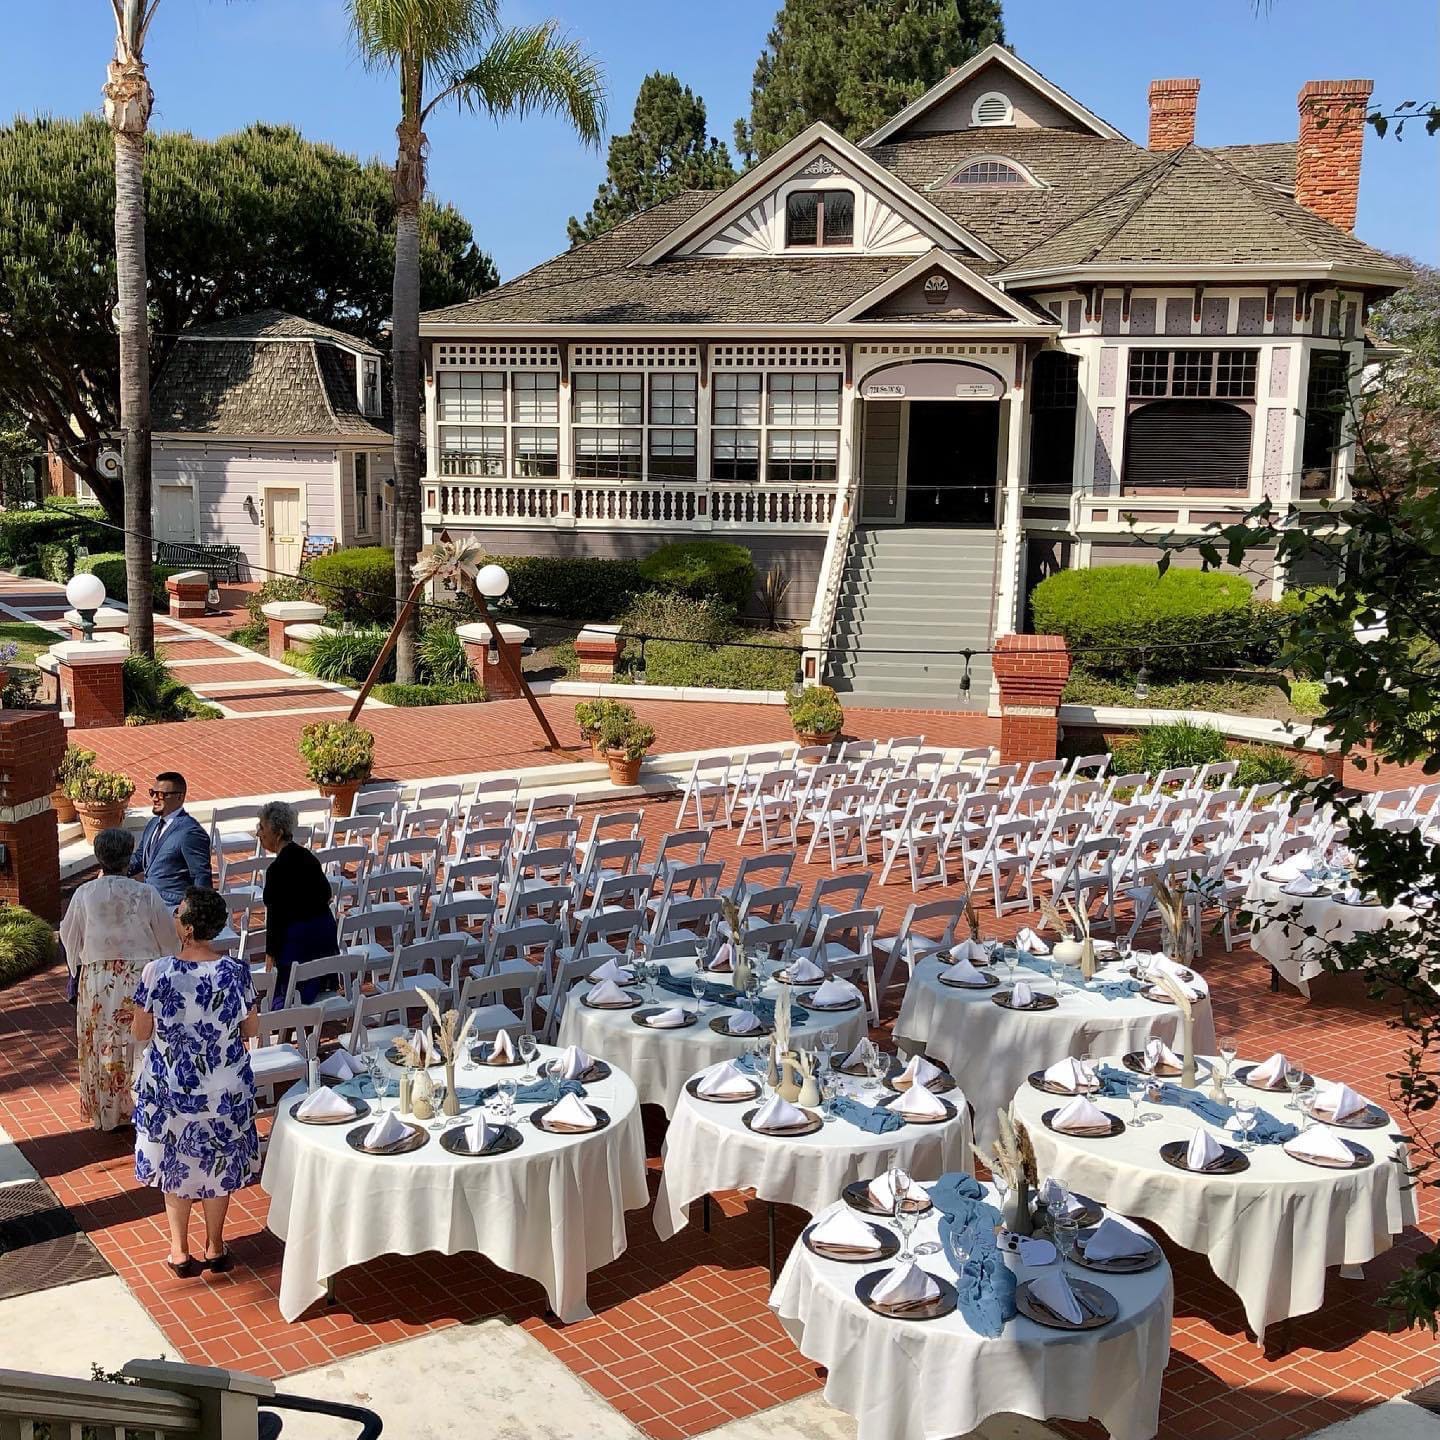 Outdoor wedding setup in Heritage Square in front of a classic Victorian house with rows of white chairs and round tables set for dining under a clear sunny sky.